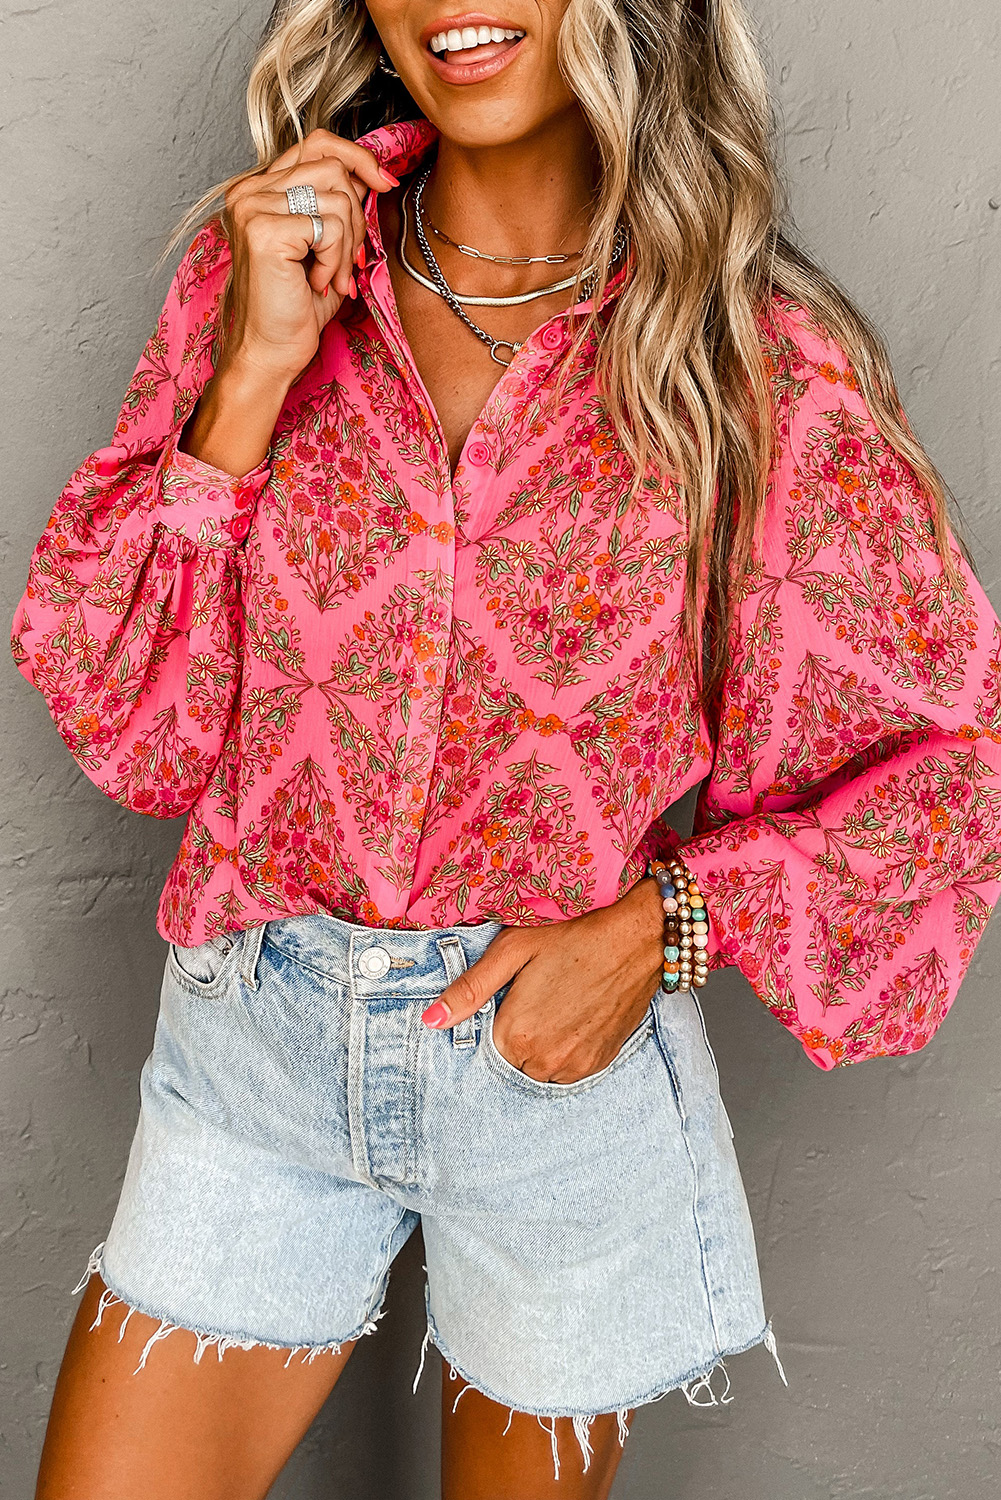 Shewin Wholesale Fall Strawberry Pink Aesthetic Floral Puff Sleeve SHIRT